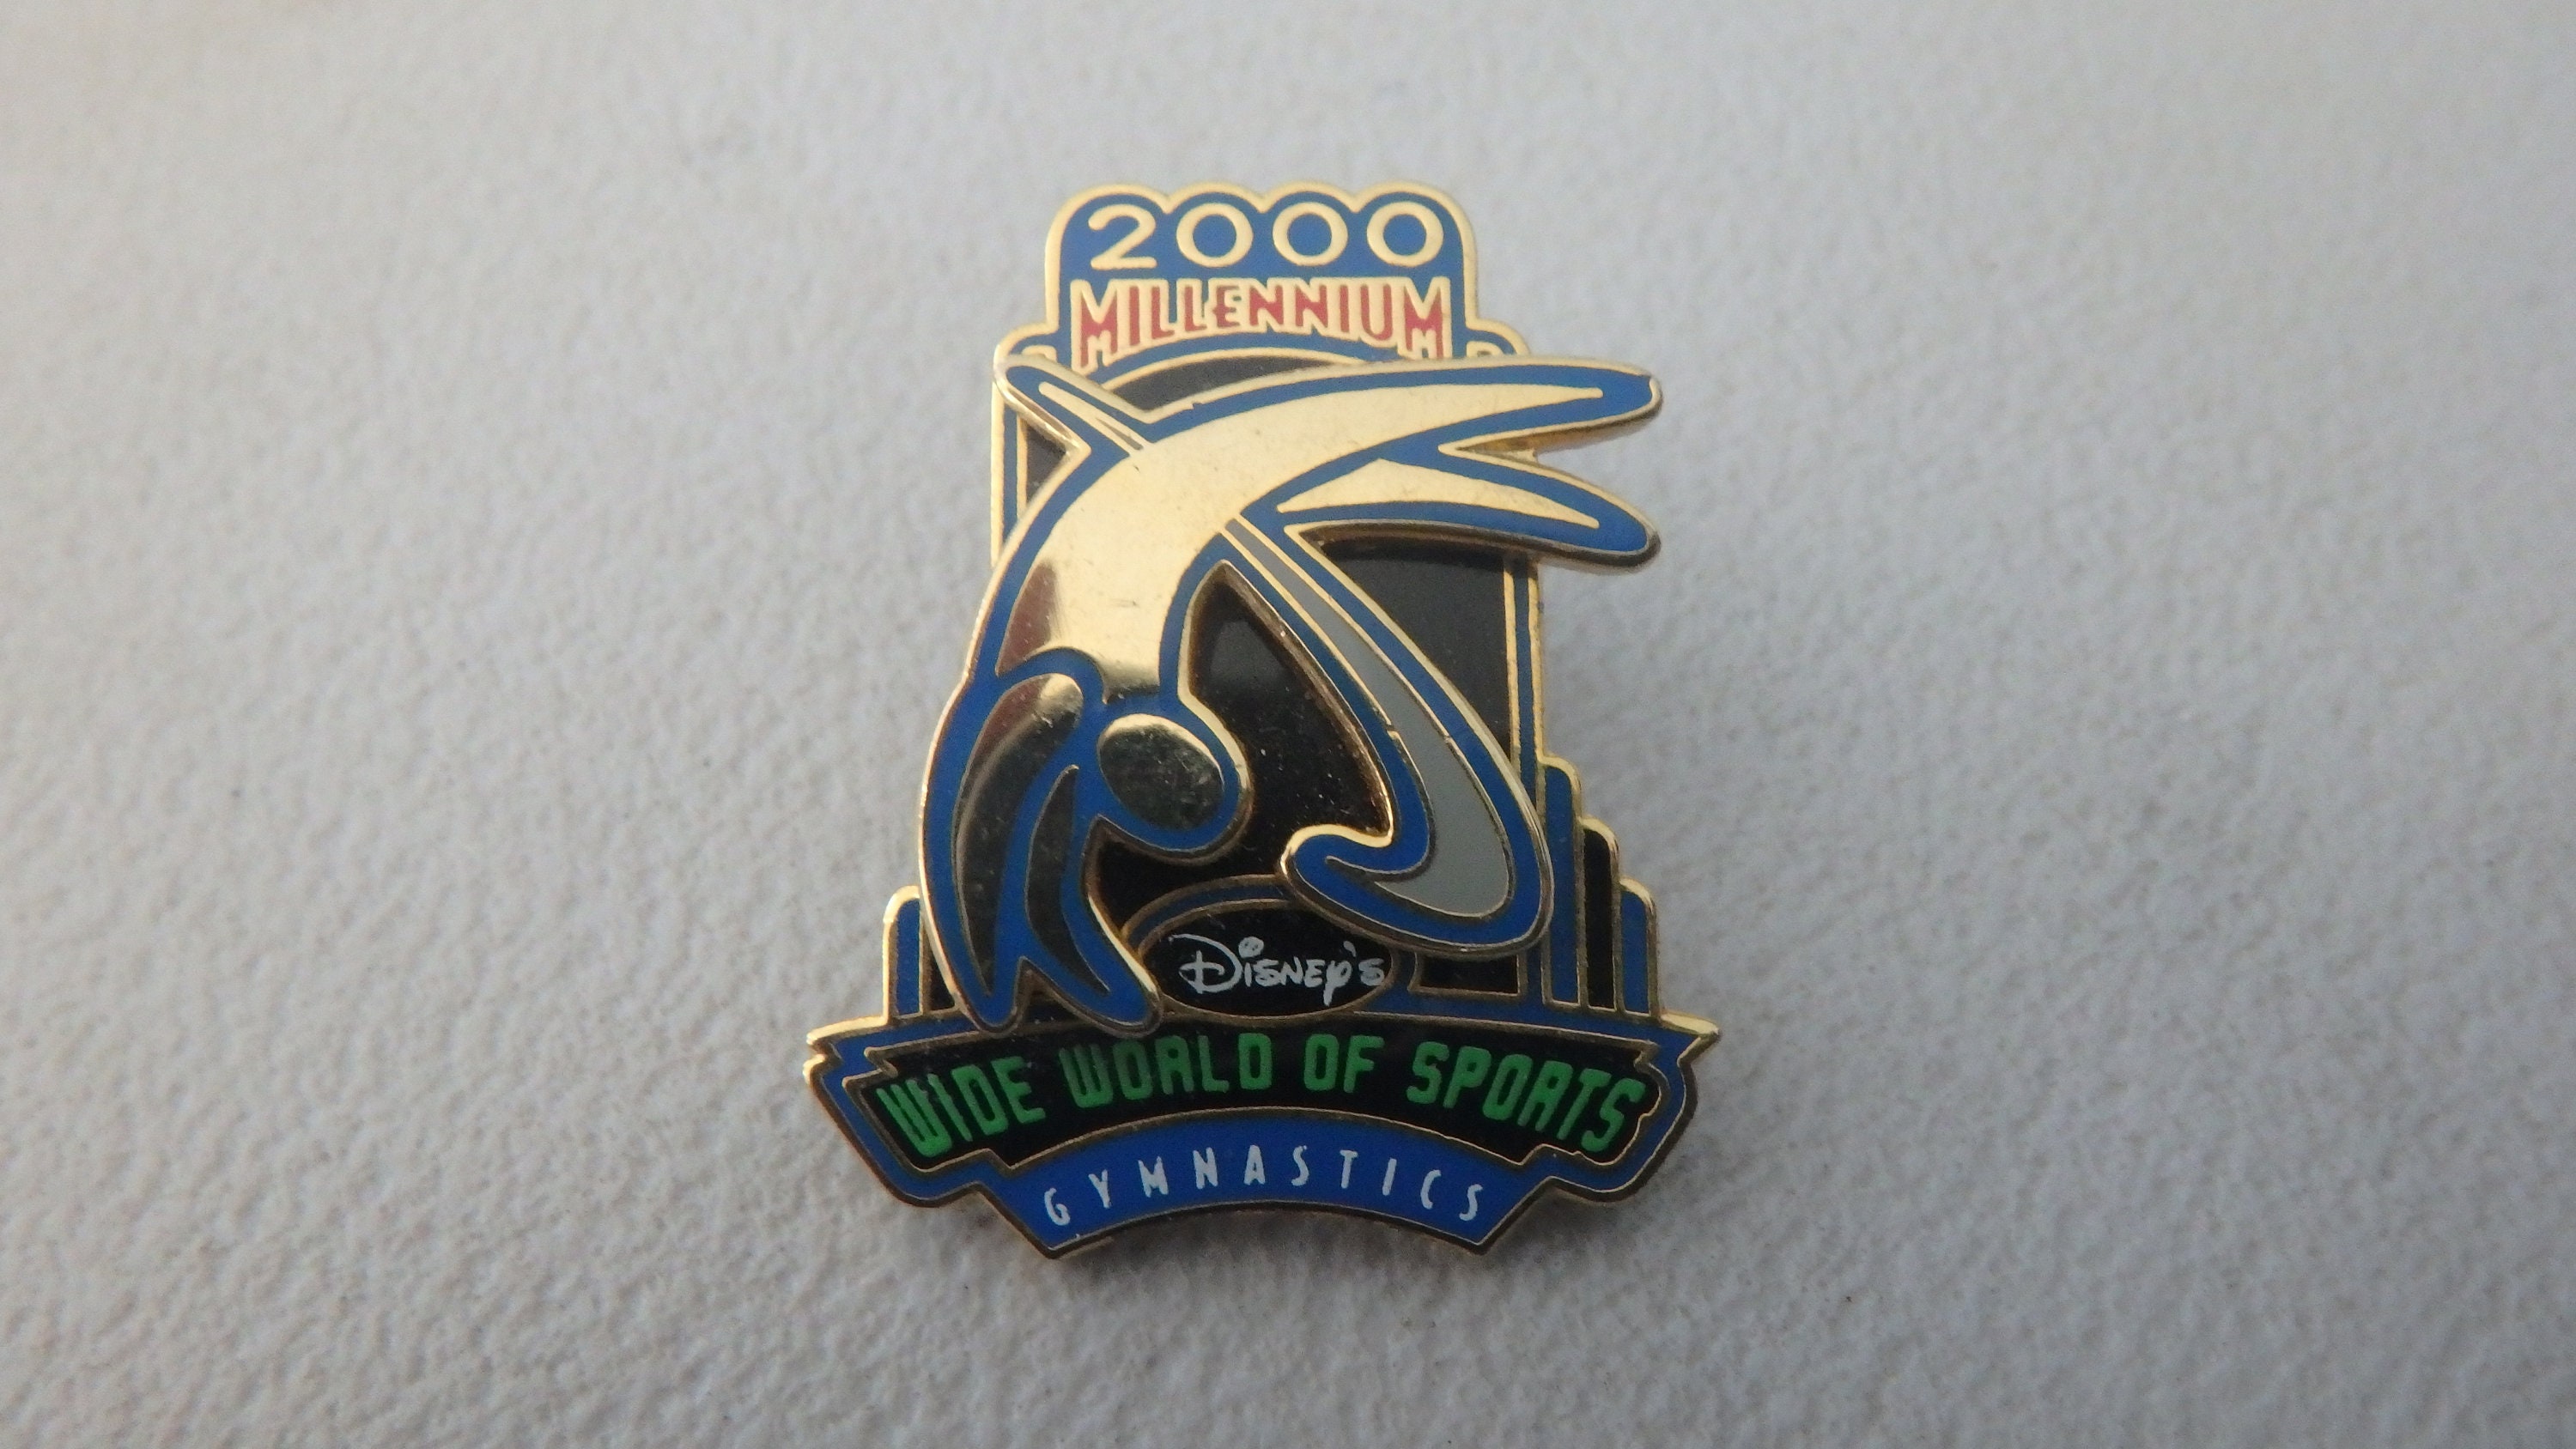 Pin on Wide World of Sports